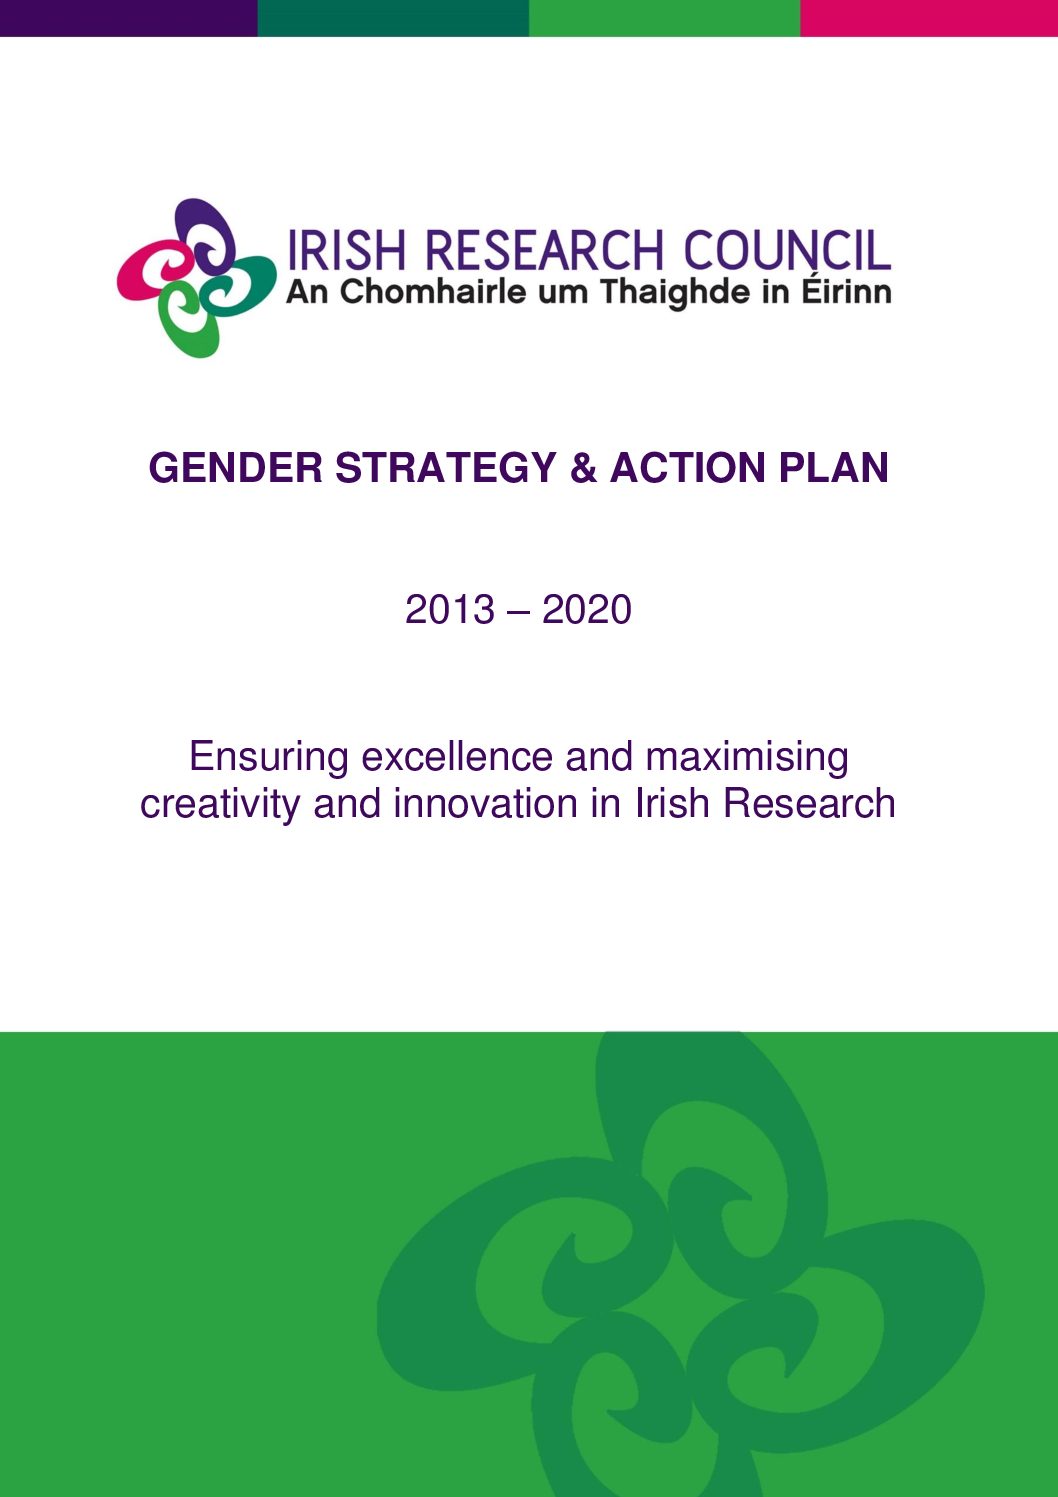 Gender Strategy and Action Plan 2013-2020